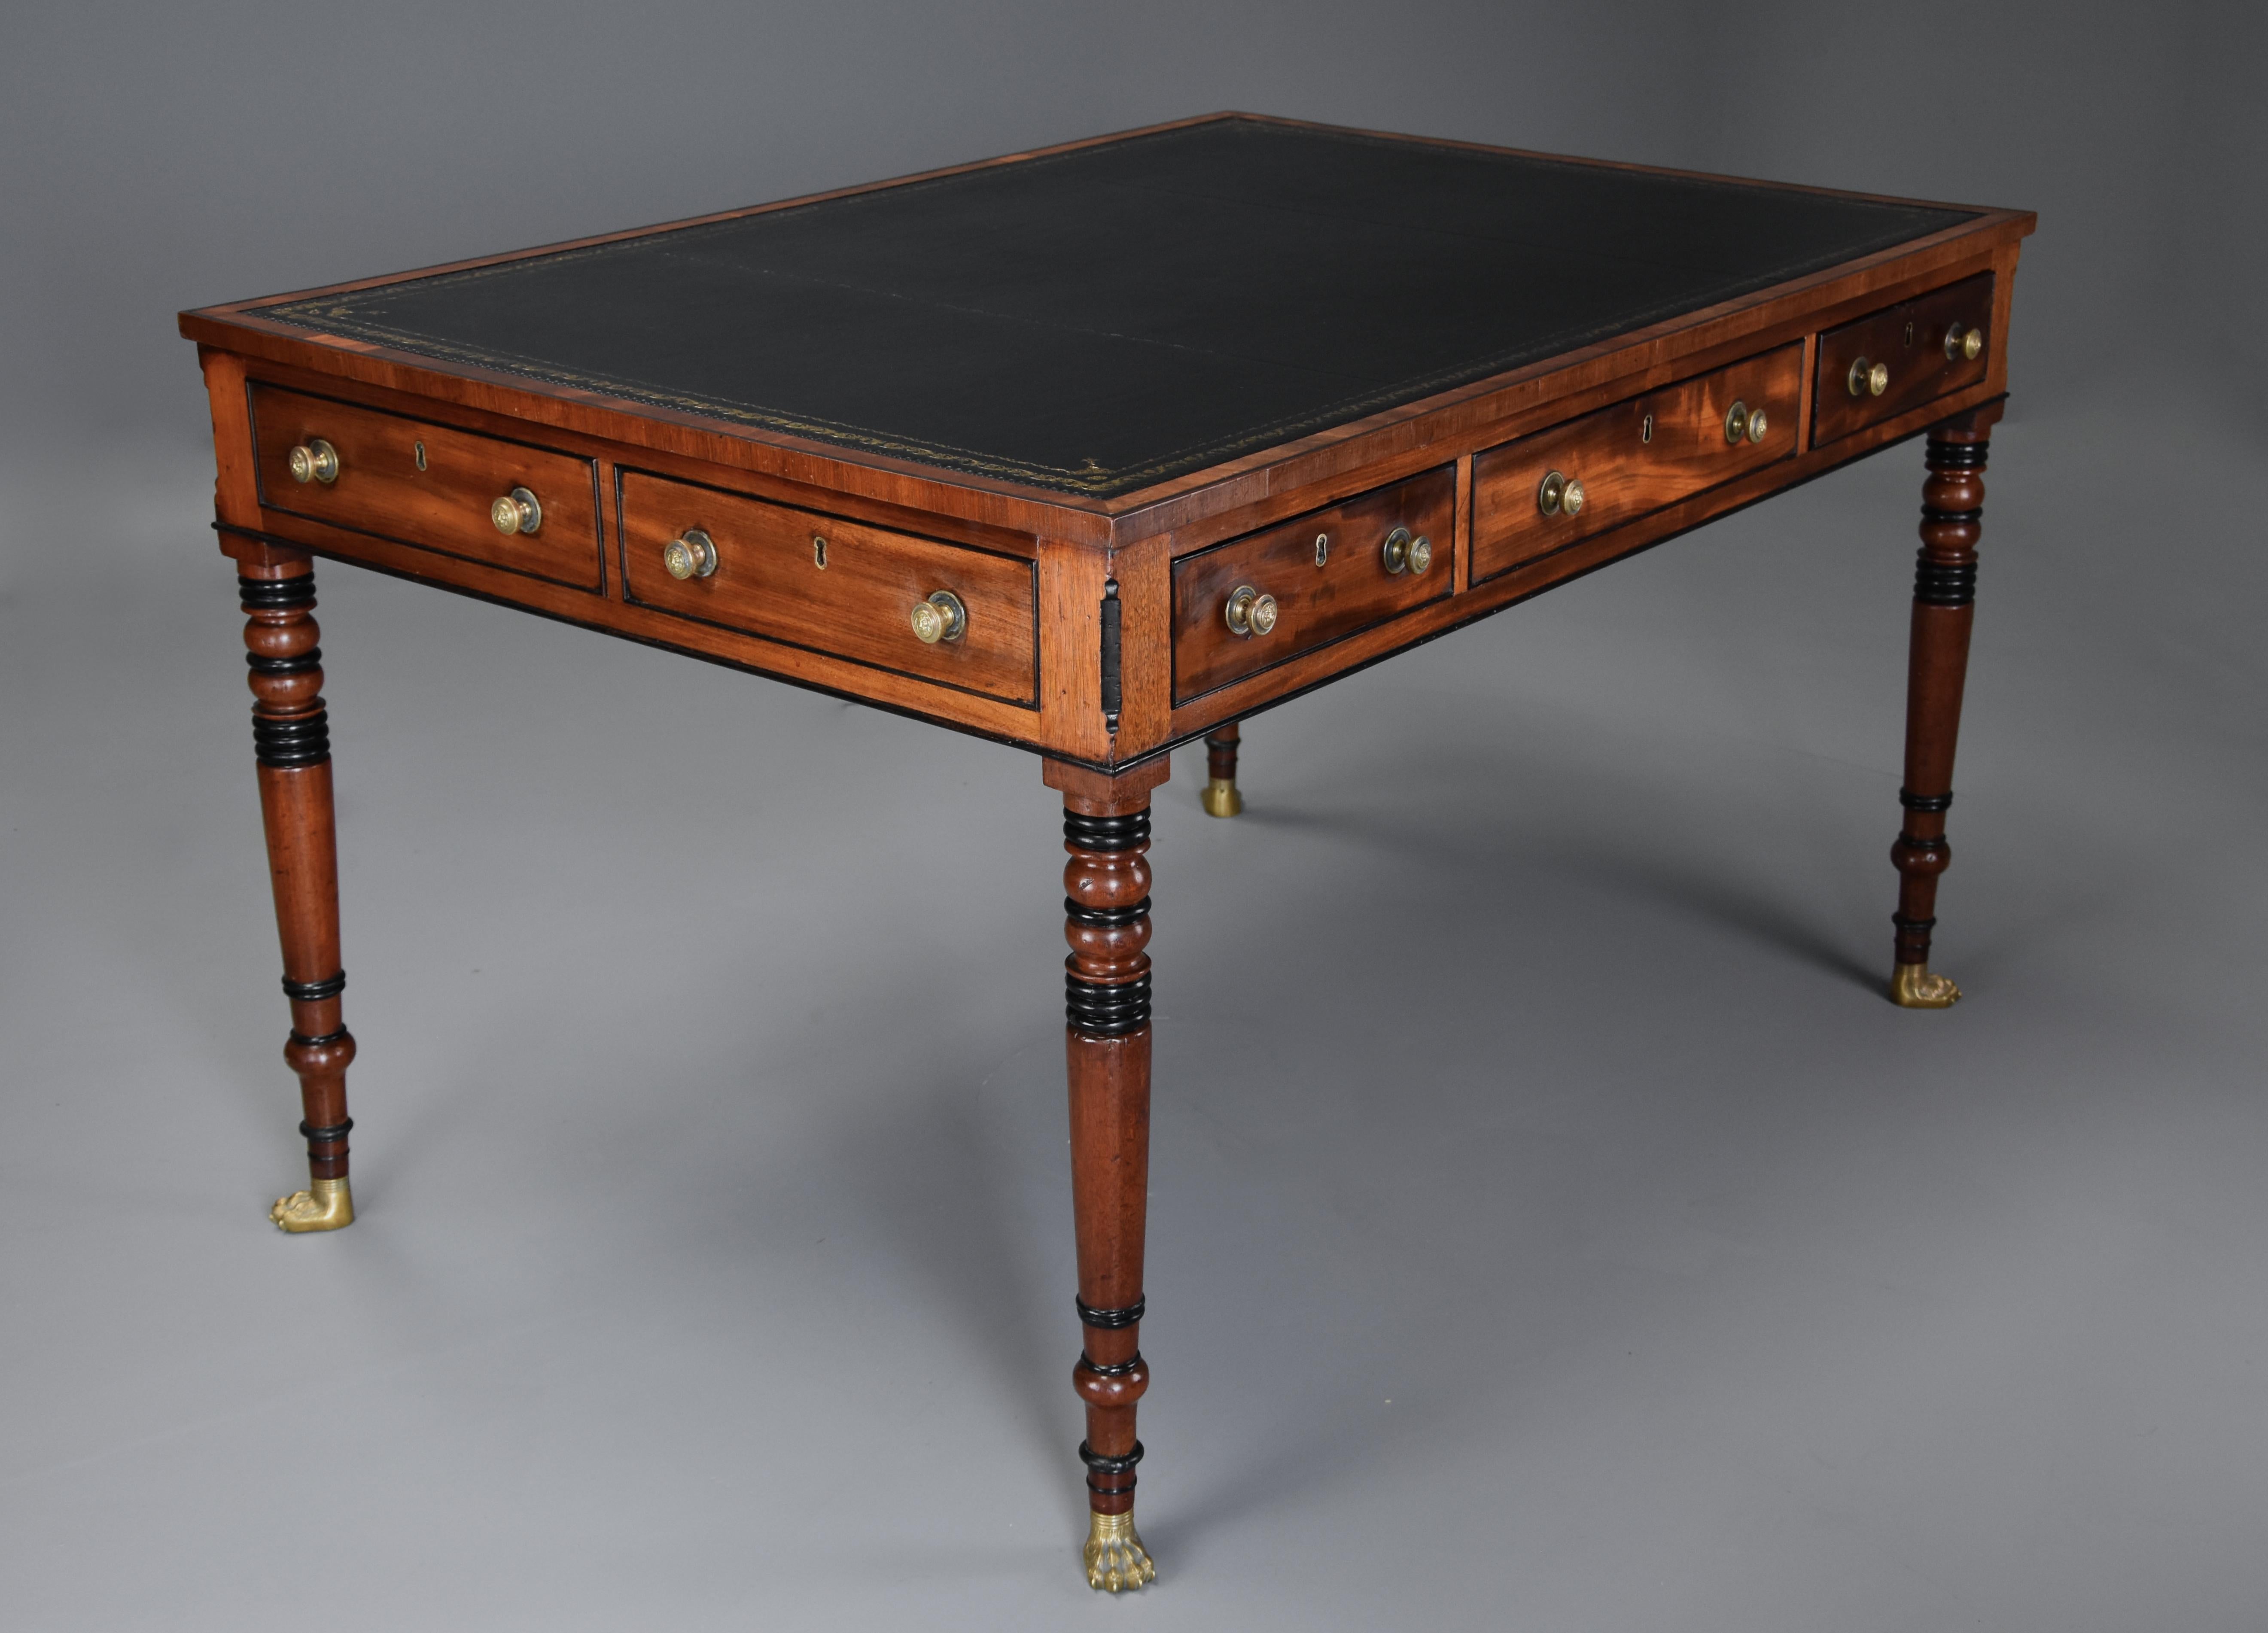 A large early 19th century Regency six-drawer writing table of fine, faded patina (color).

This writing table consists of a finely tooled black leather top surrounded by a mahogany crossbanded edge with ebony line.

This leads down to three